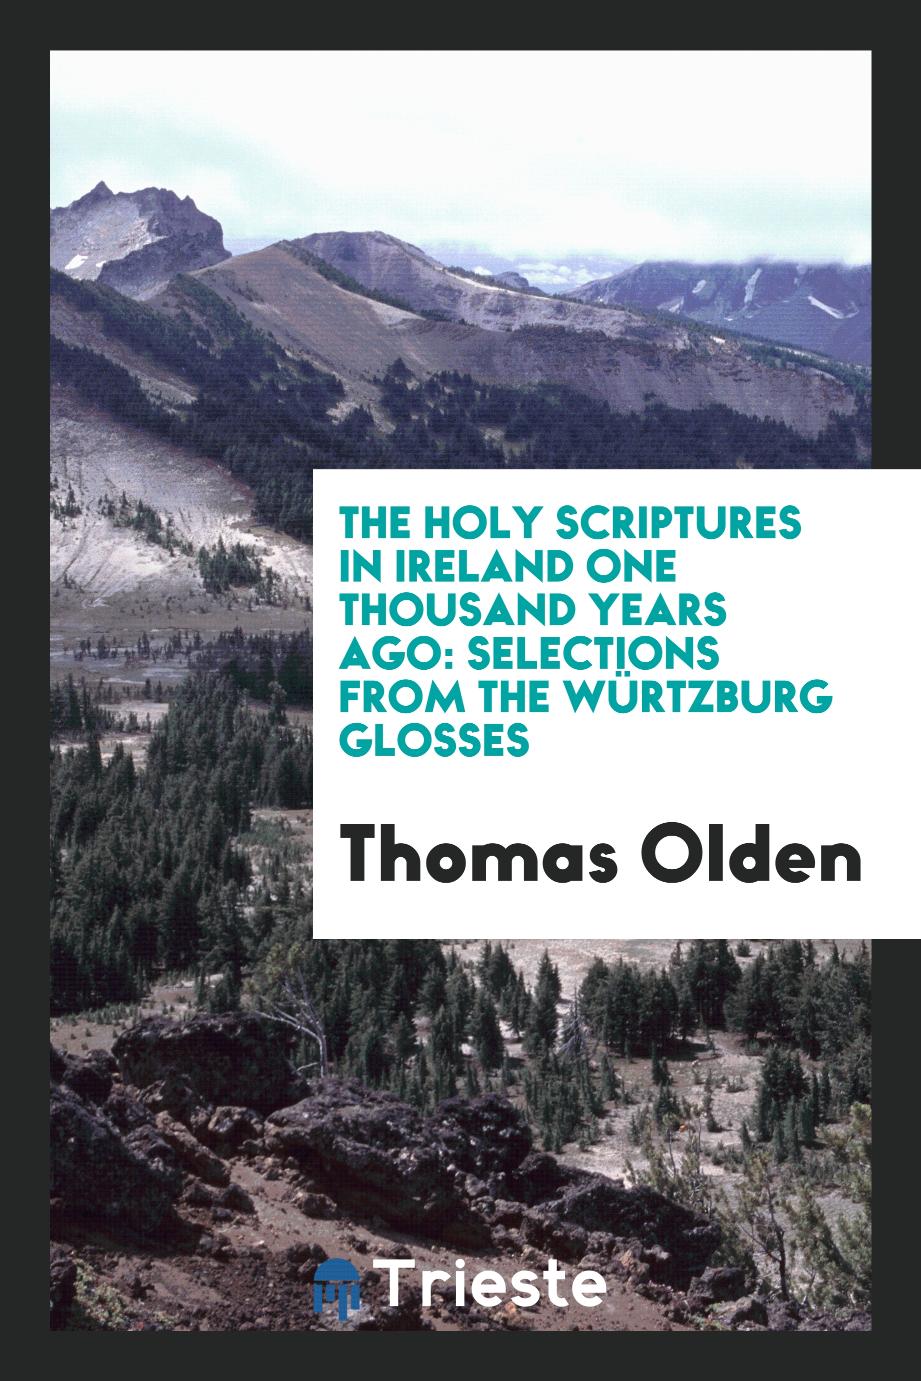 The Holy Scriptures in Ireland One Thousand Years Ago: Selections from the Würtzburg Glosses